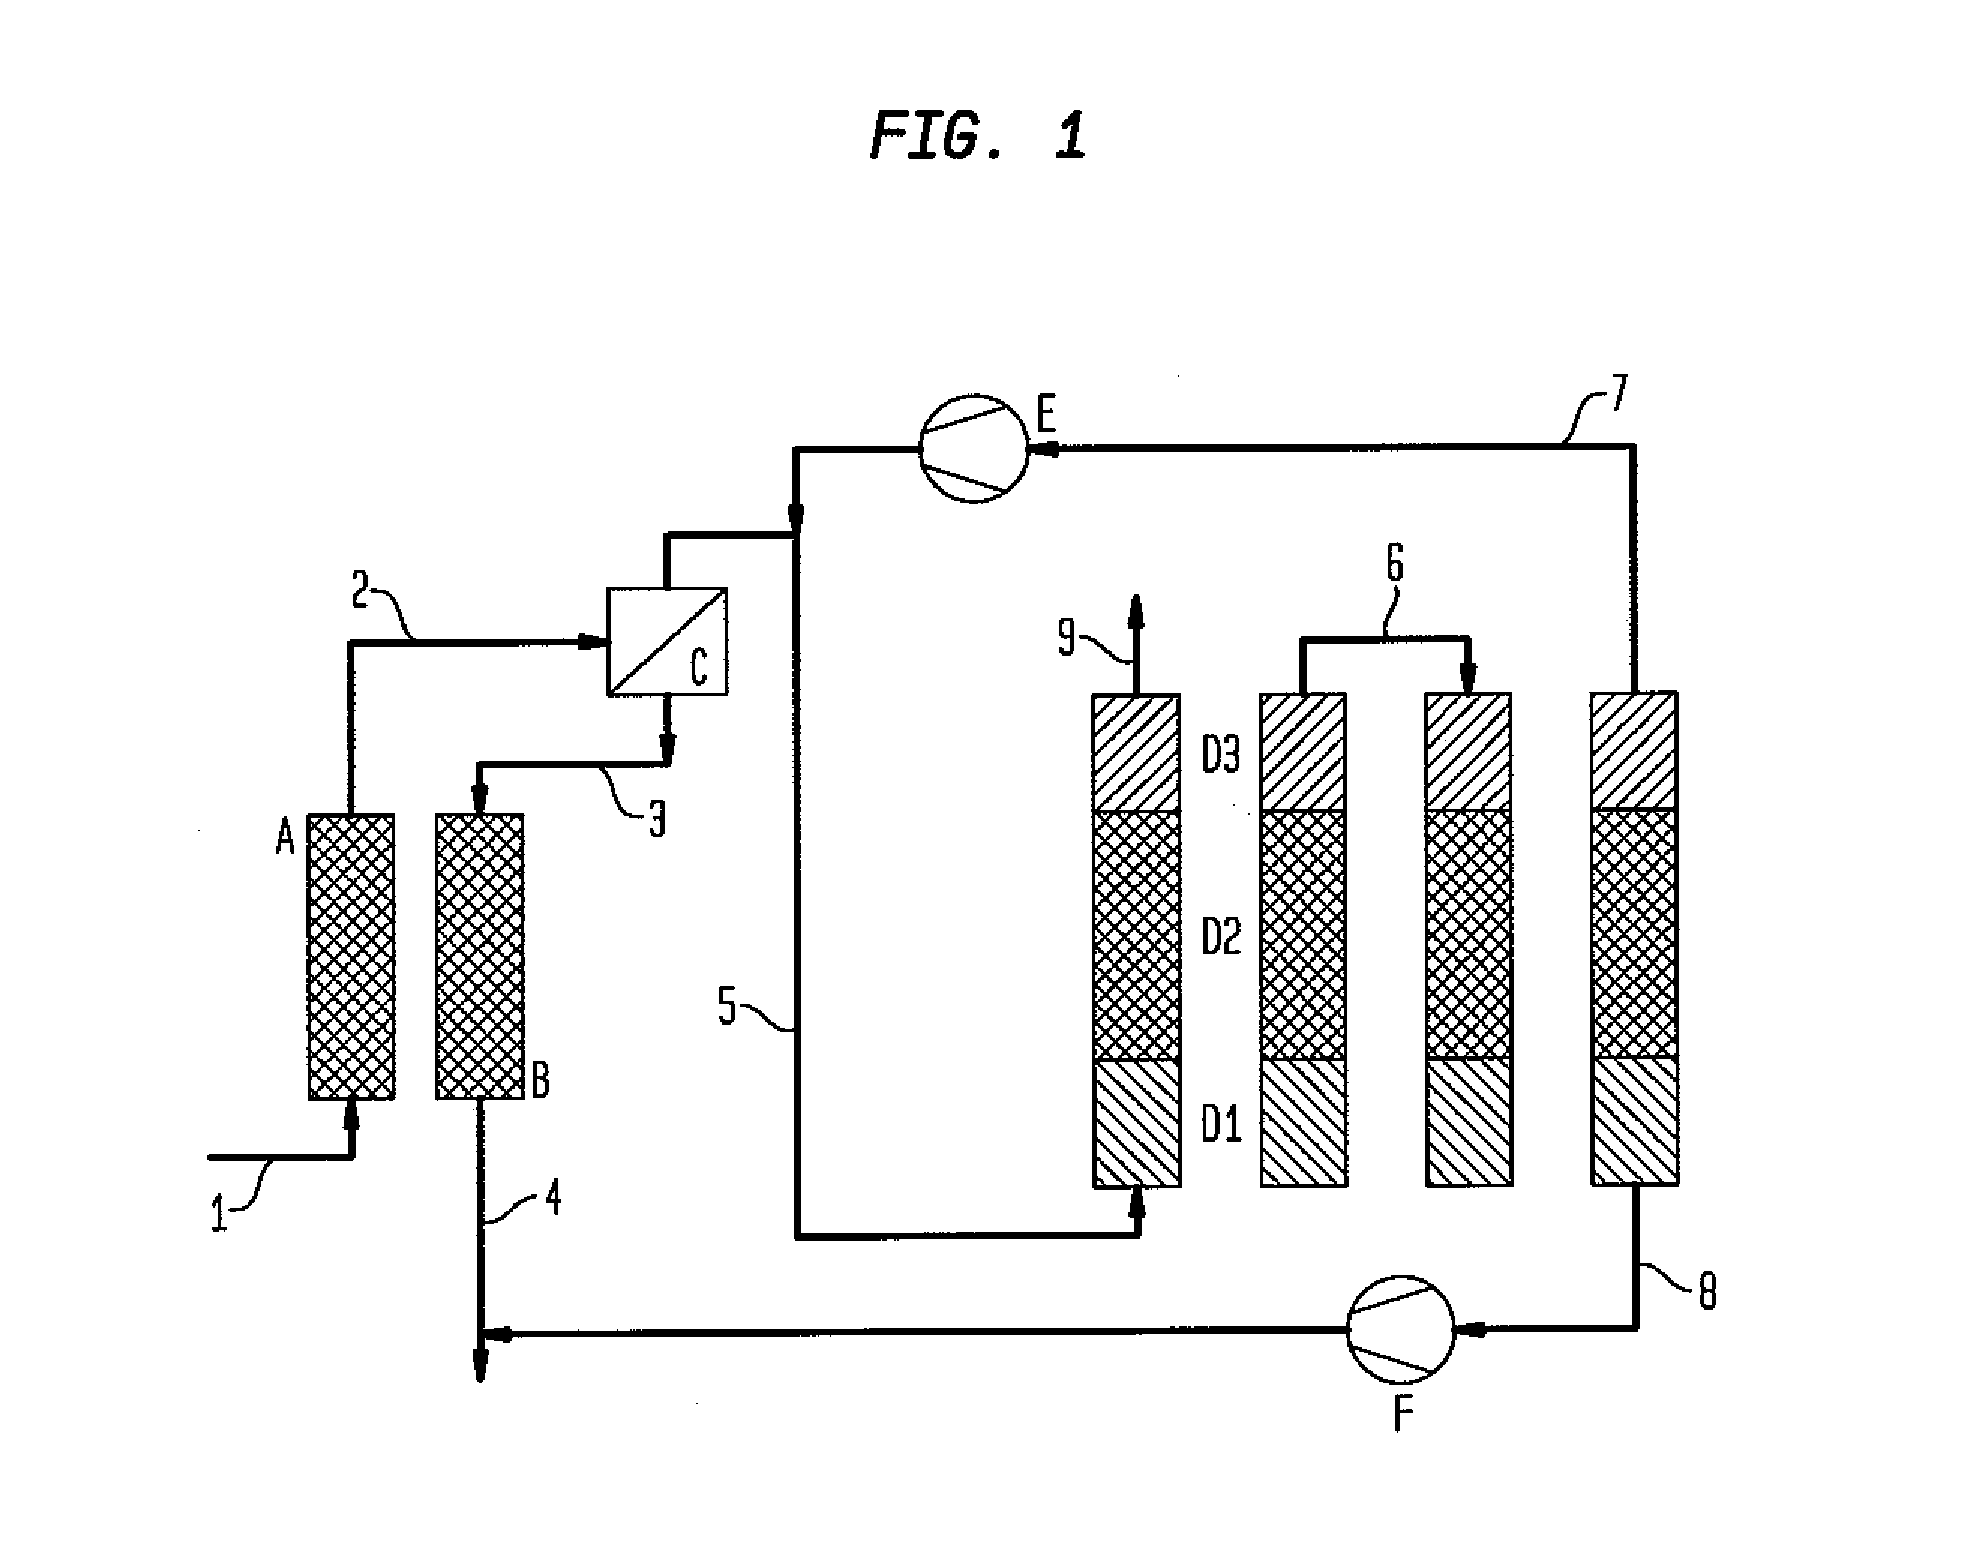 Methods for removing contaminants from natural gas